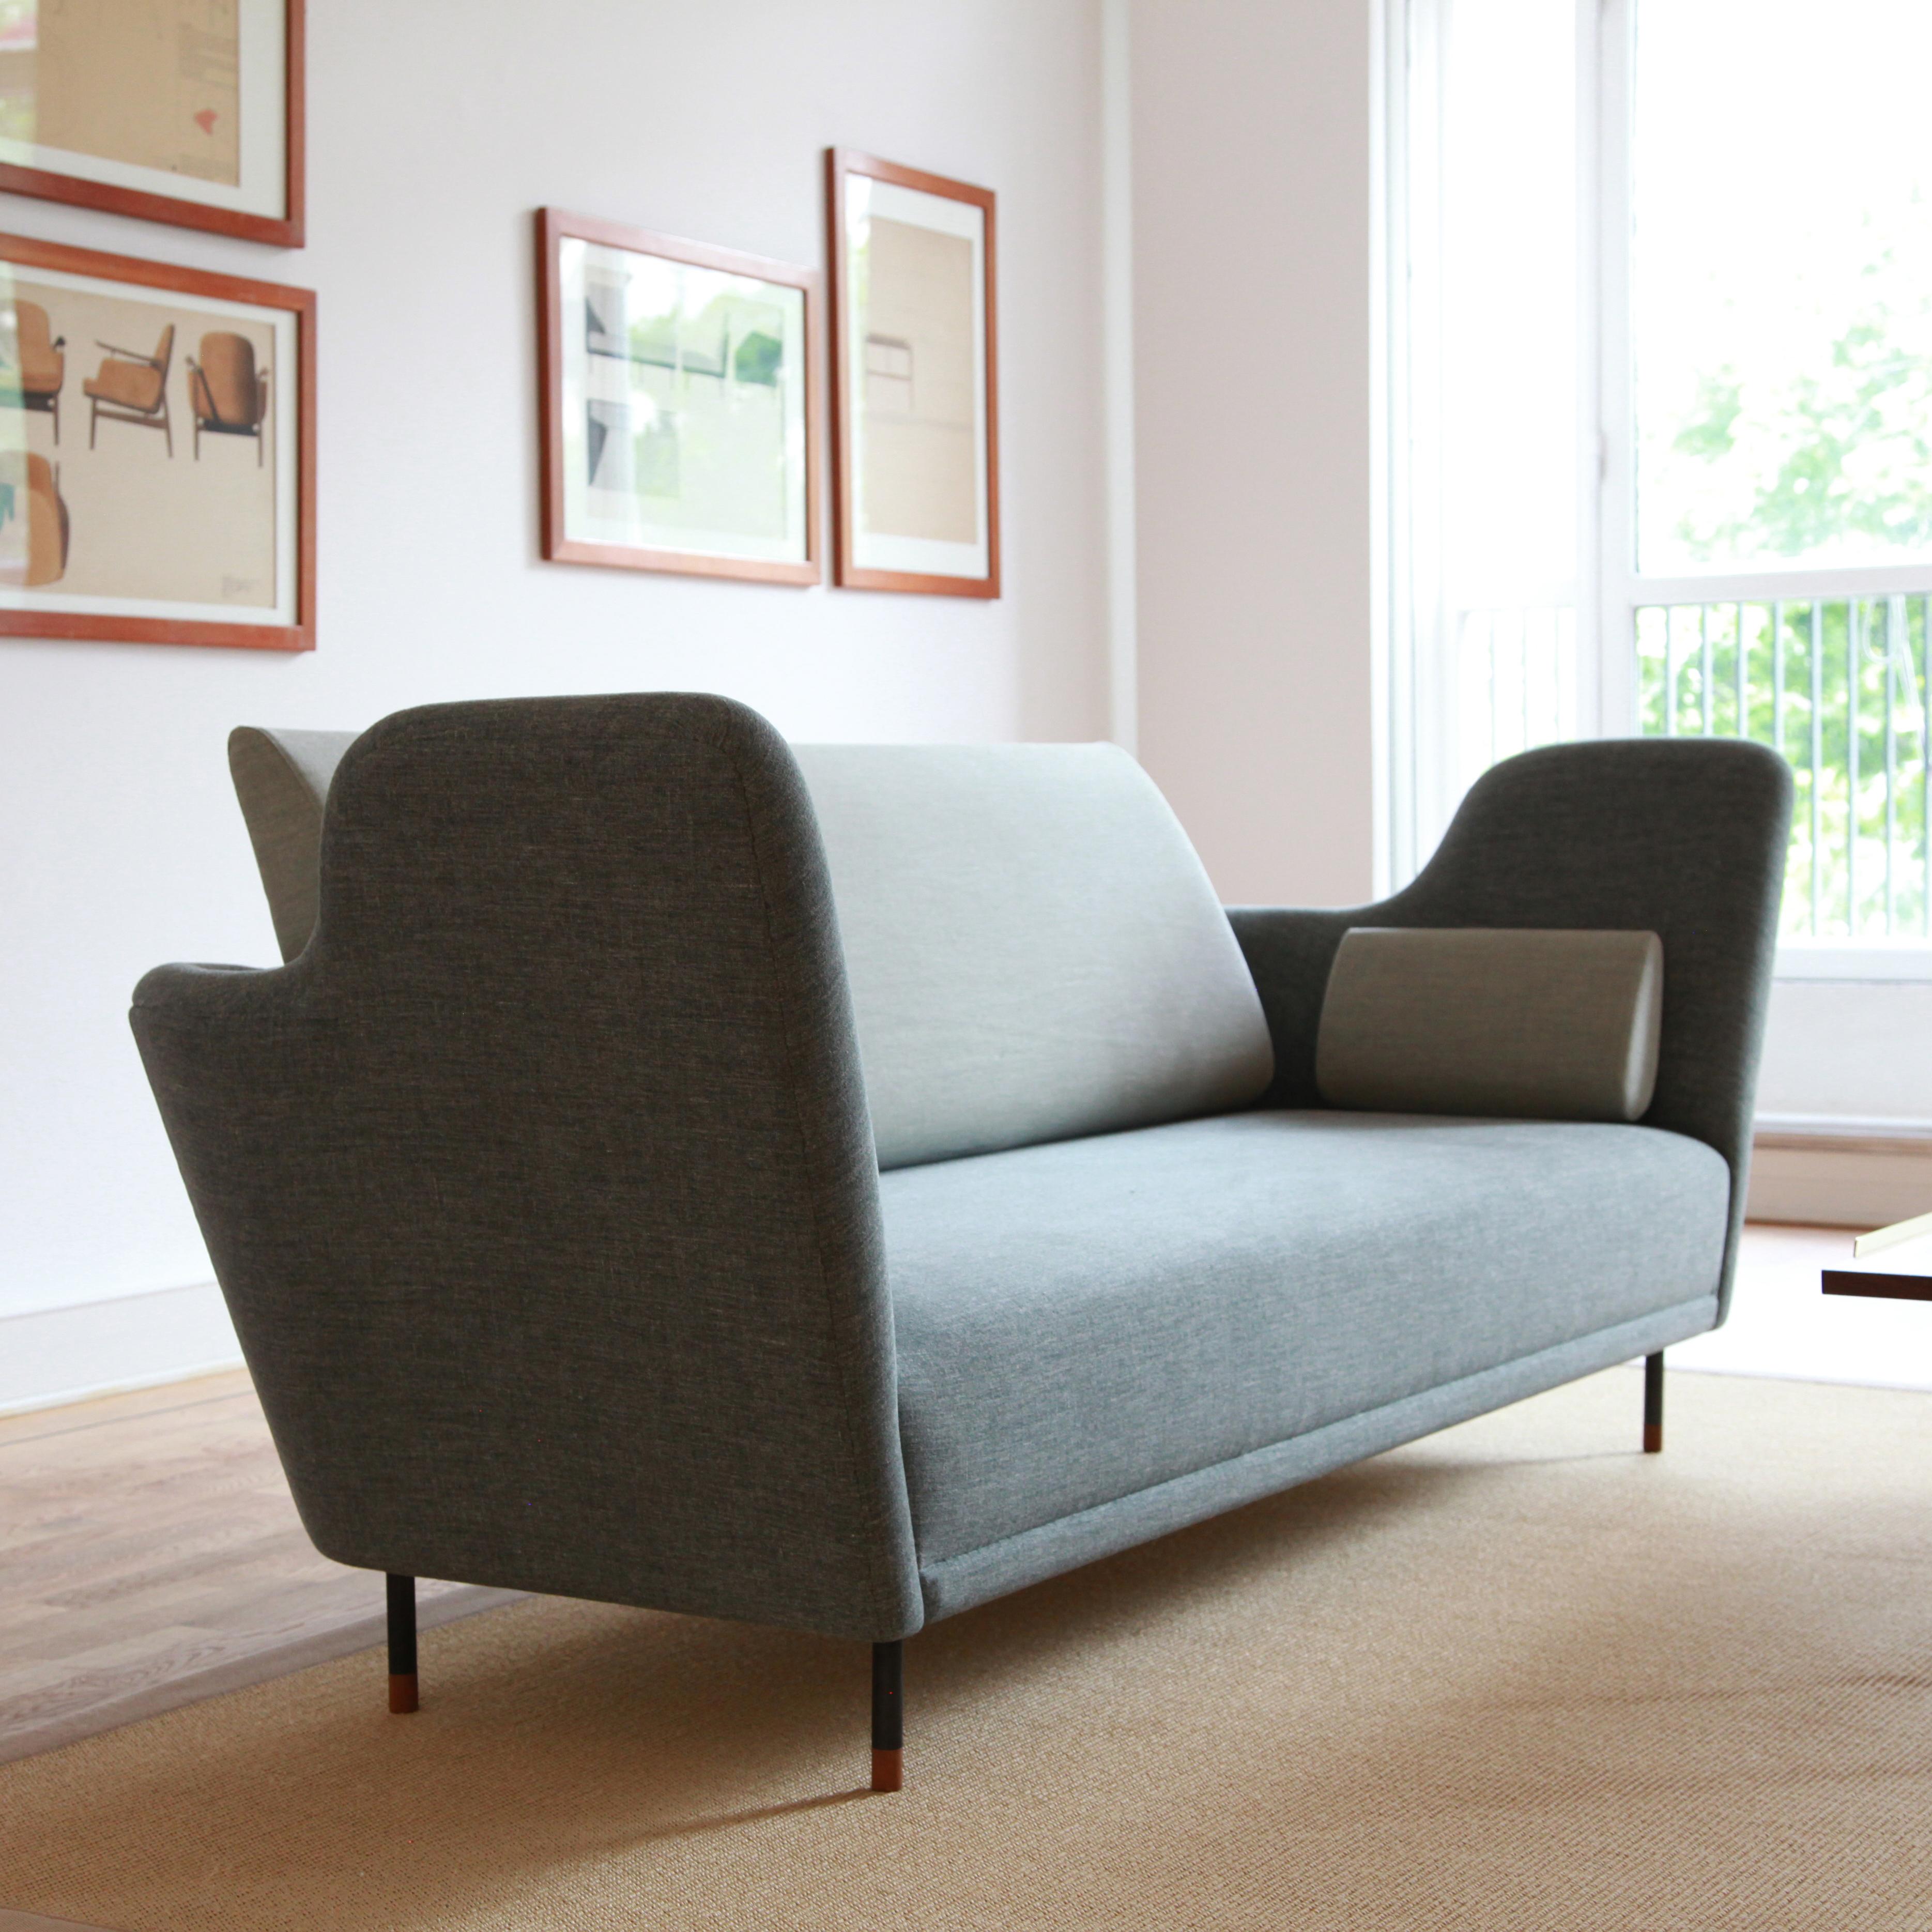 Sofa designed by Finn Juhl in 1957, relaunched in 2000.
Manufactured by House of Finn Juhl in Denmark.

The sofa was exhibited for the very first time in the Tivoli Gardens in Copenhagen during 1957. However, it took more than 40 years before